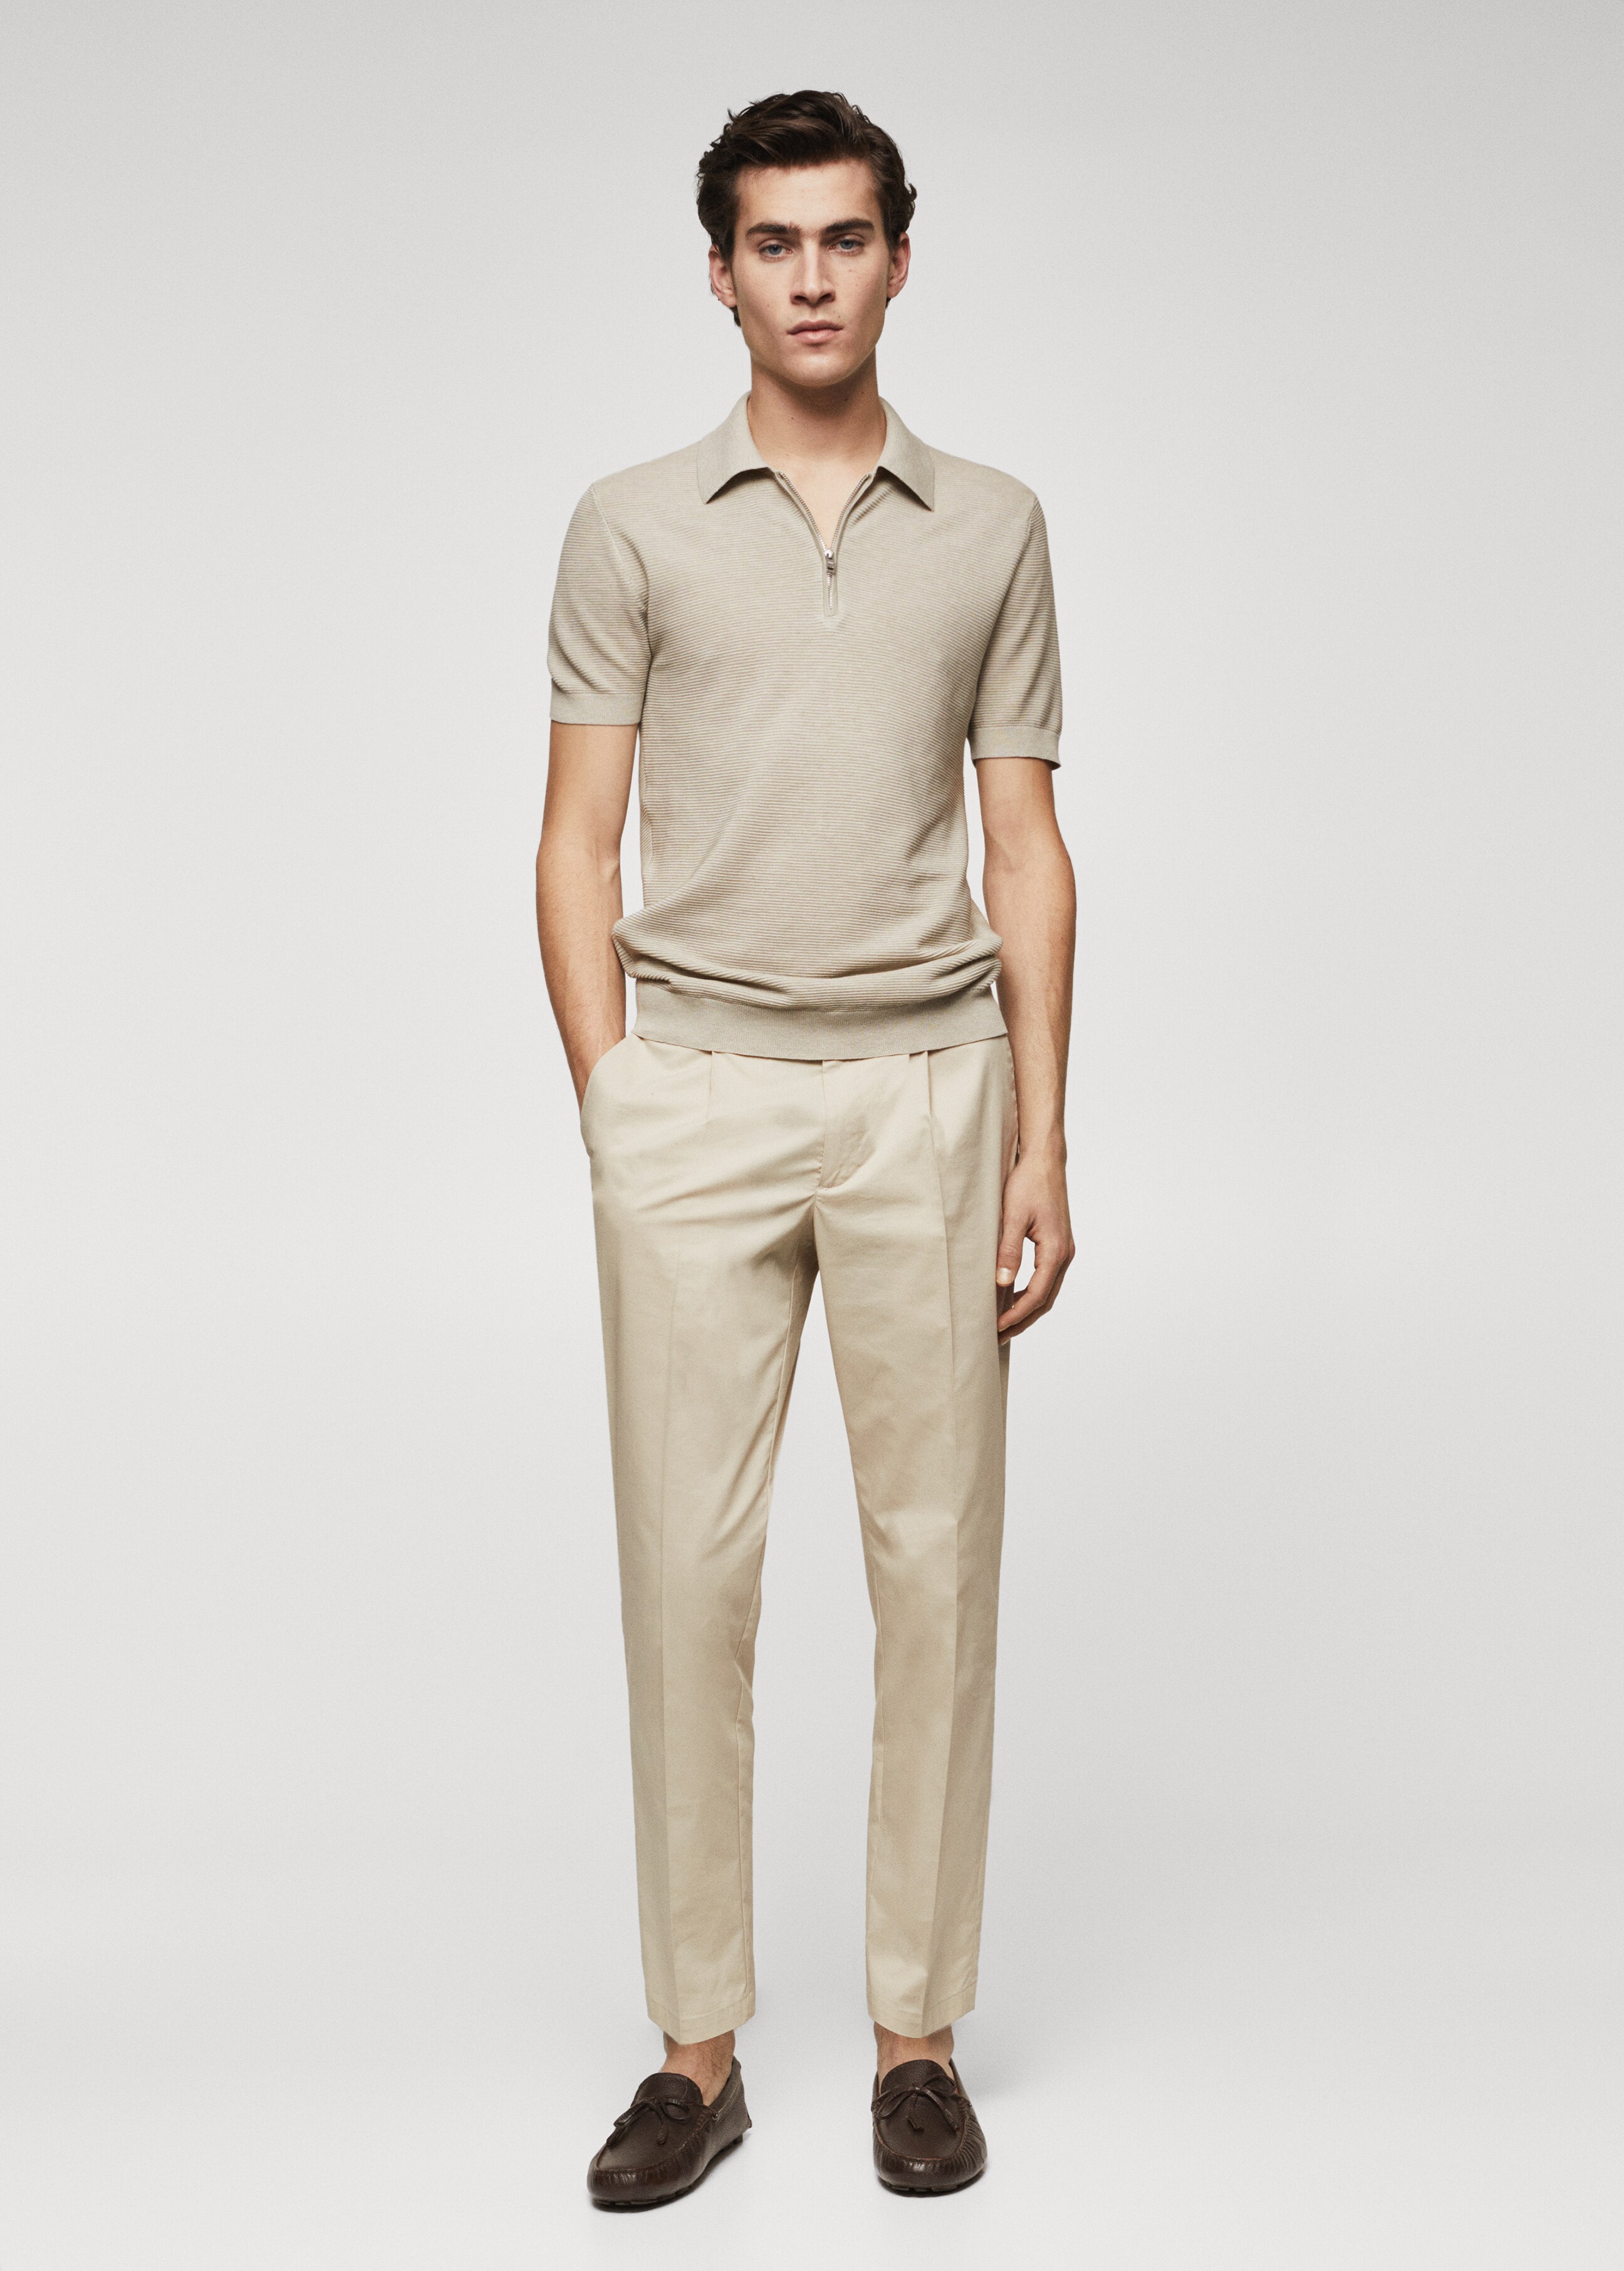 Structured fine-knit polo shirt - General plane